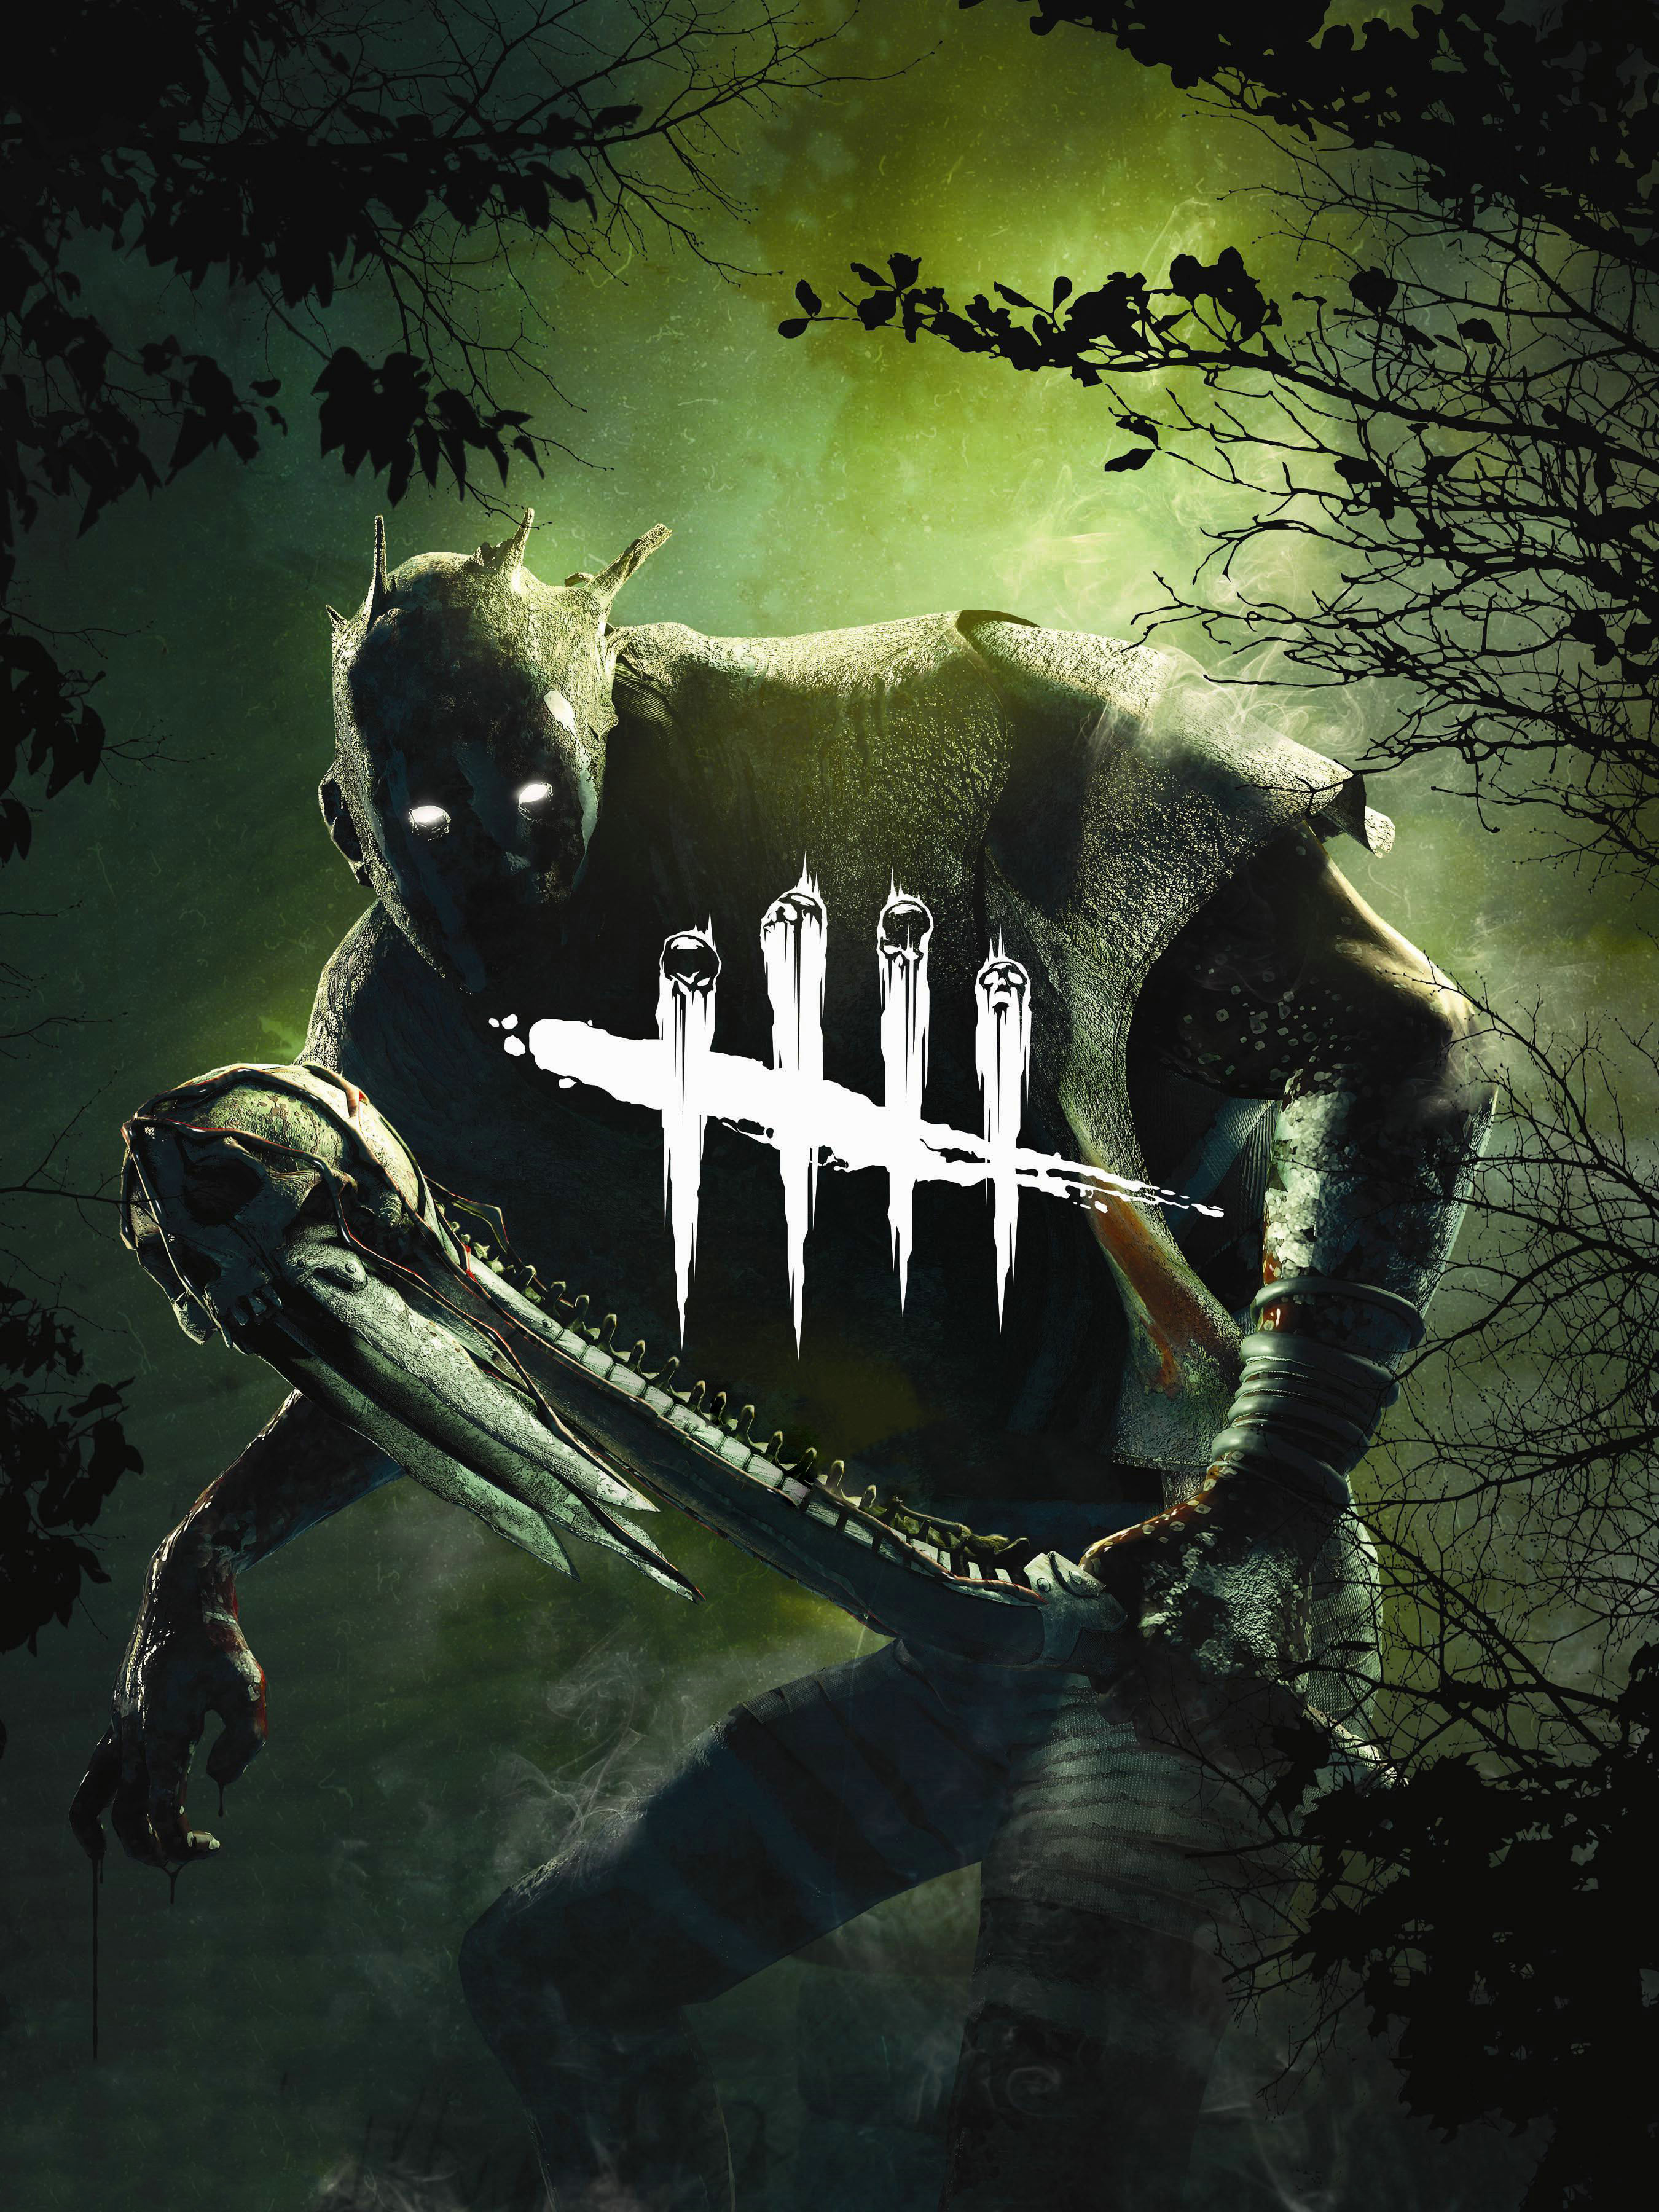 Killer Wraith Dead By Daylight Wallpaper Hd Games 4k Wallpapers Images Photos And Background Wallpapers Den